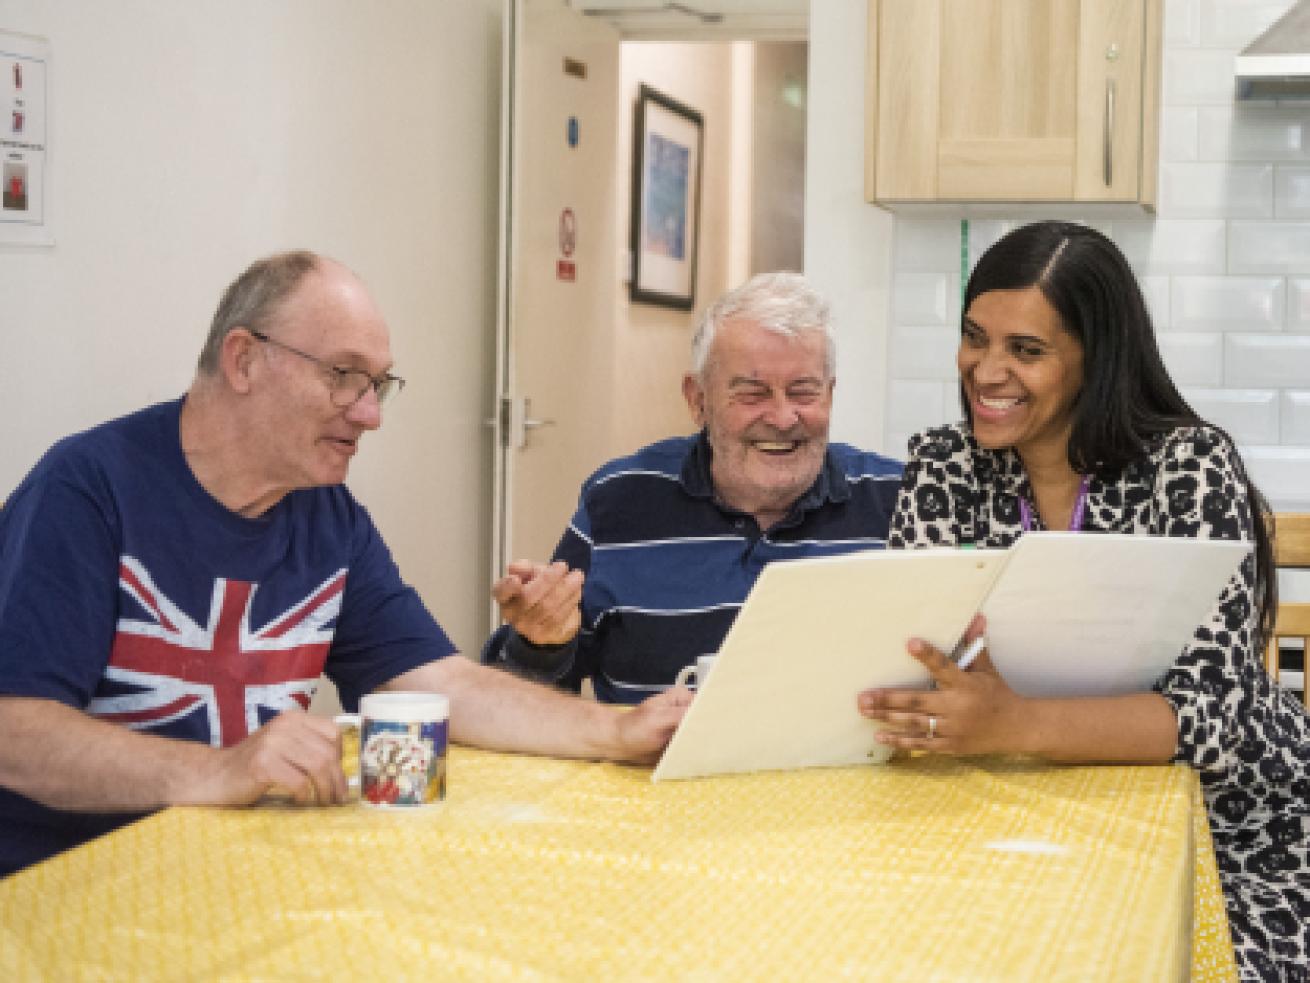 Sanctuary Supported Living staff and residents sat at a kitchen table looking at a binder and smiling